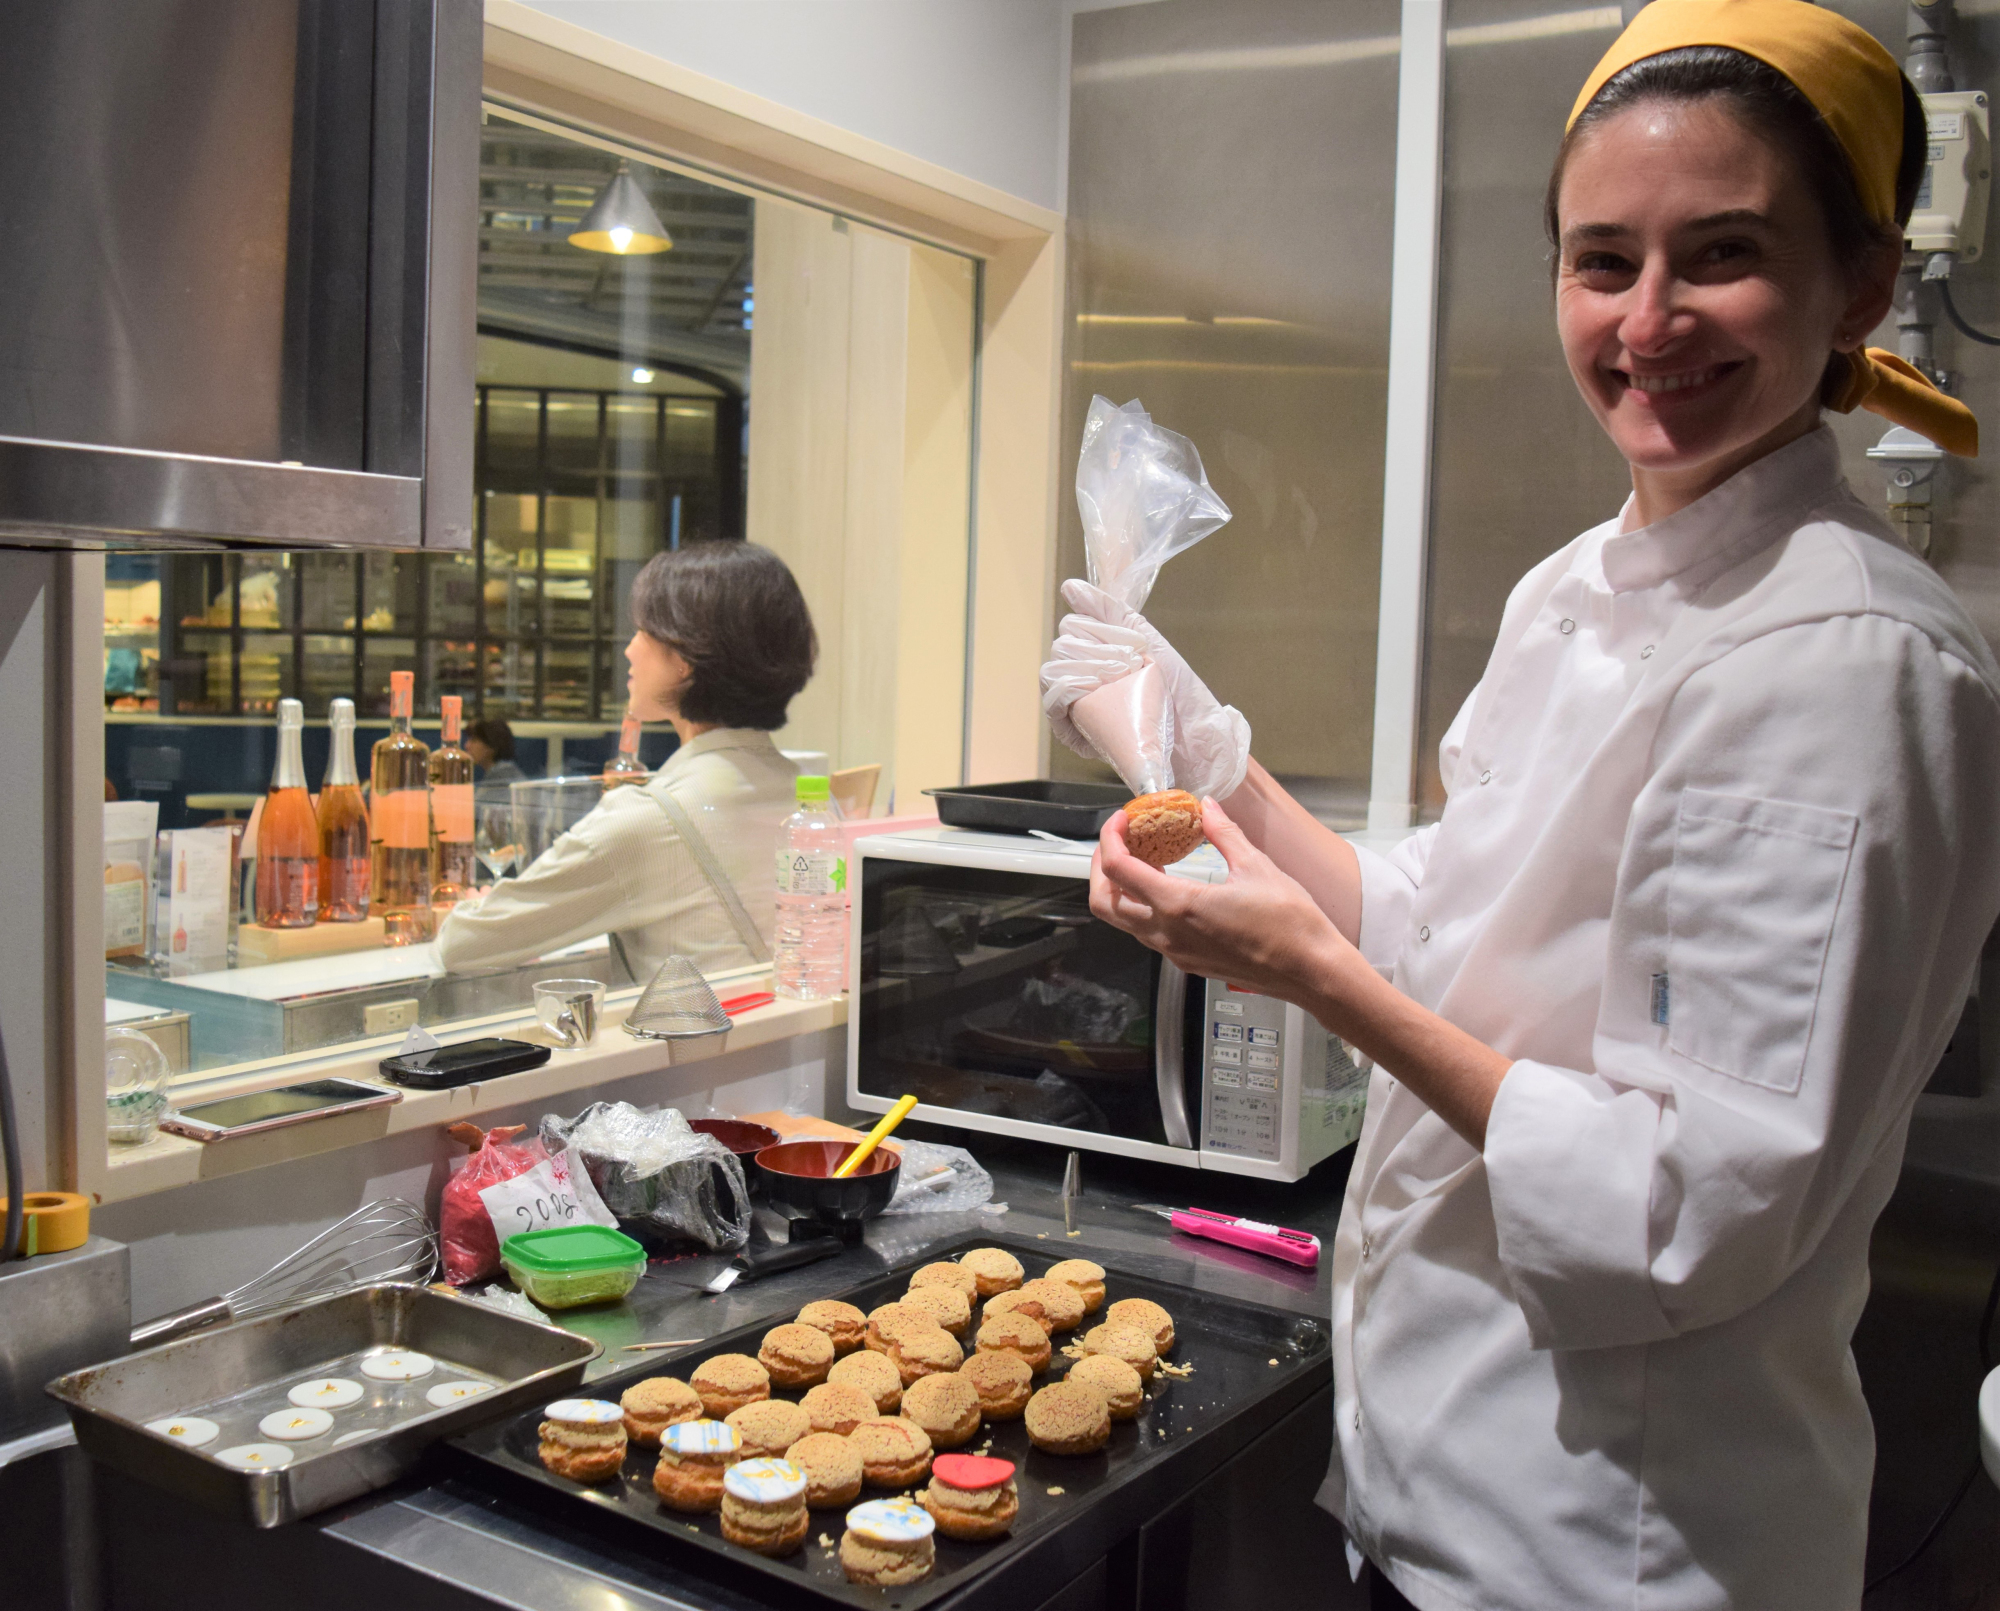 French entrepreneur Jennifer Court makes her gluten-free choux pastry at a pop-up store that opened Nov. 6 inside the Takashimaya department store in Tokyo's Nihonbashi district. | MASUMI KOIZUMI